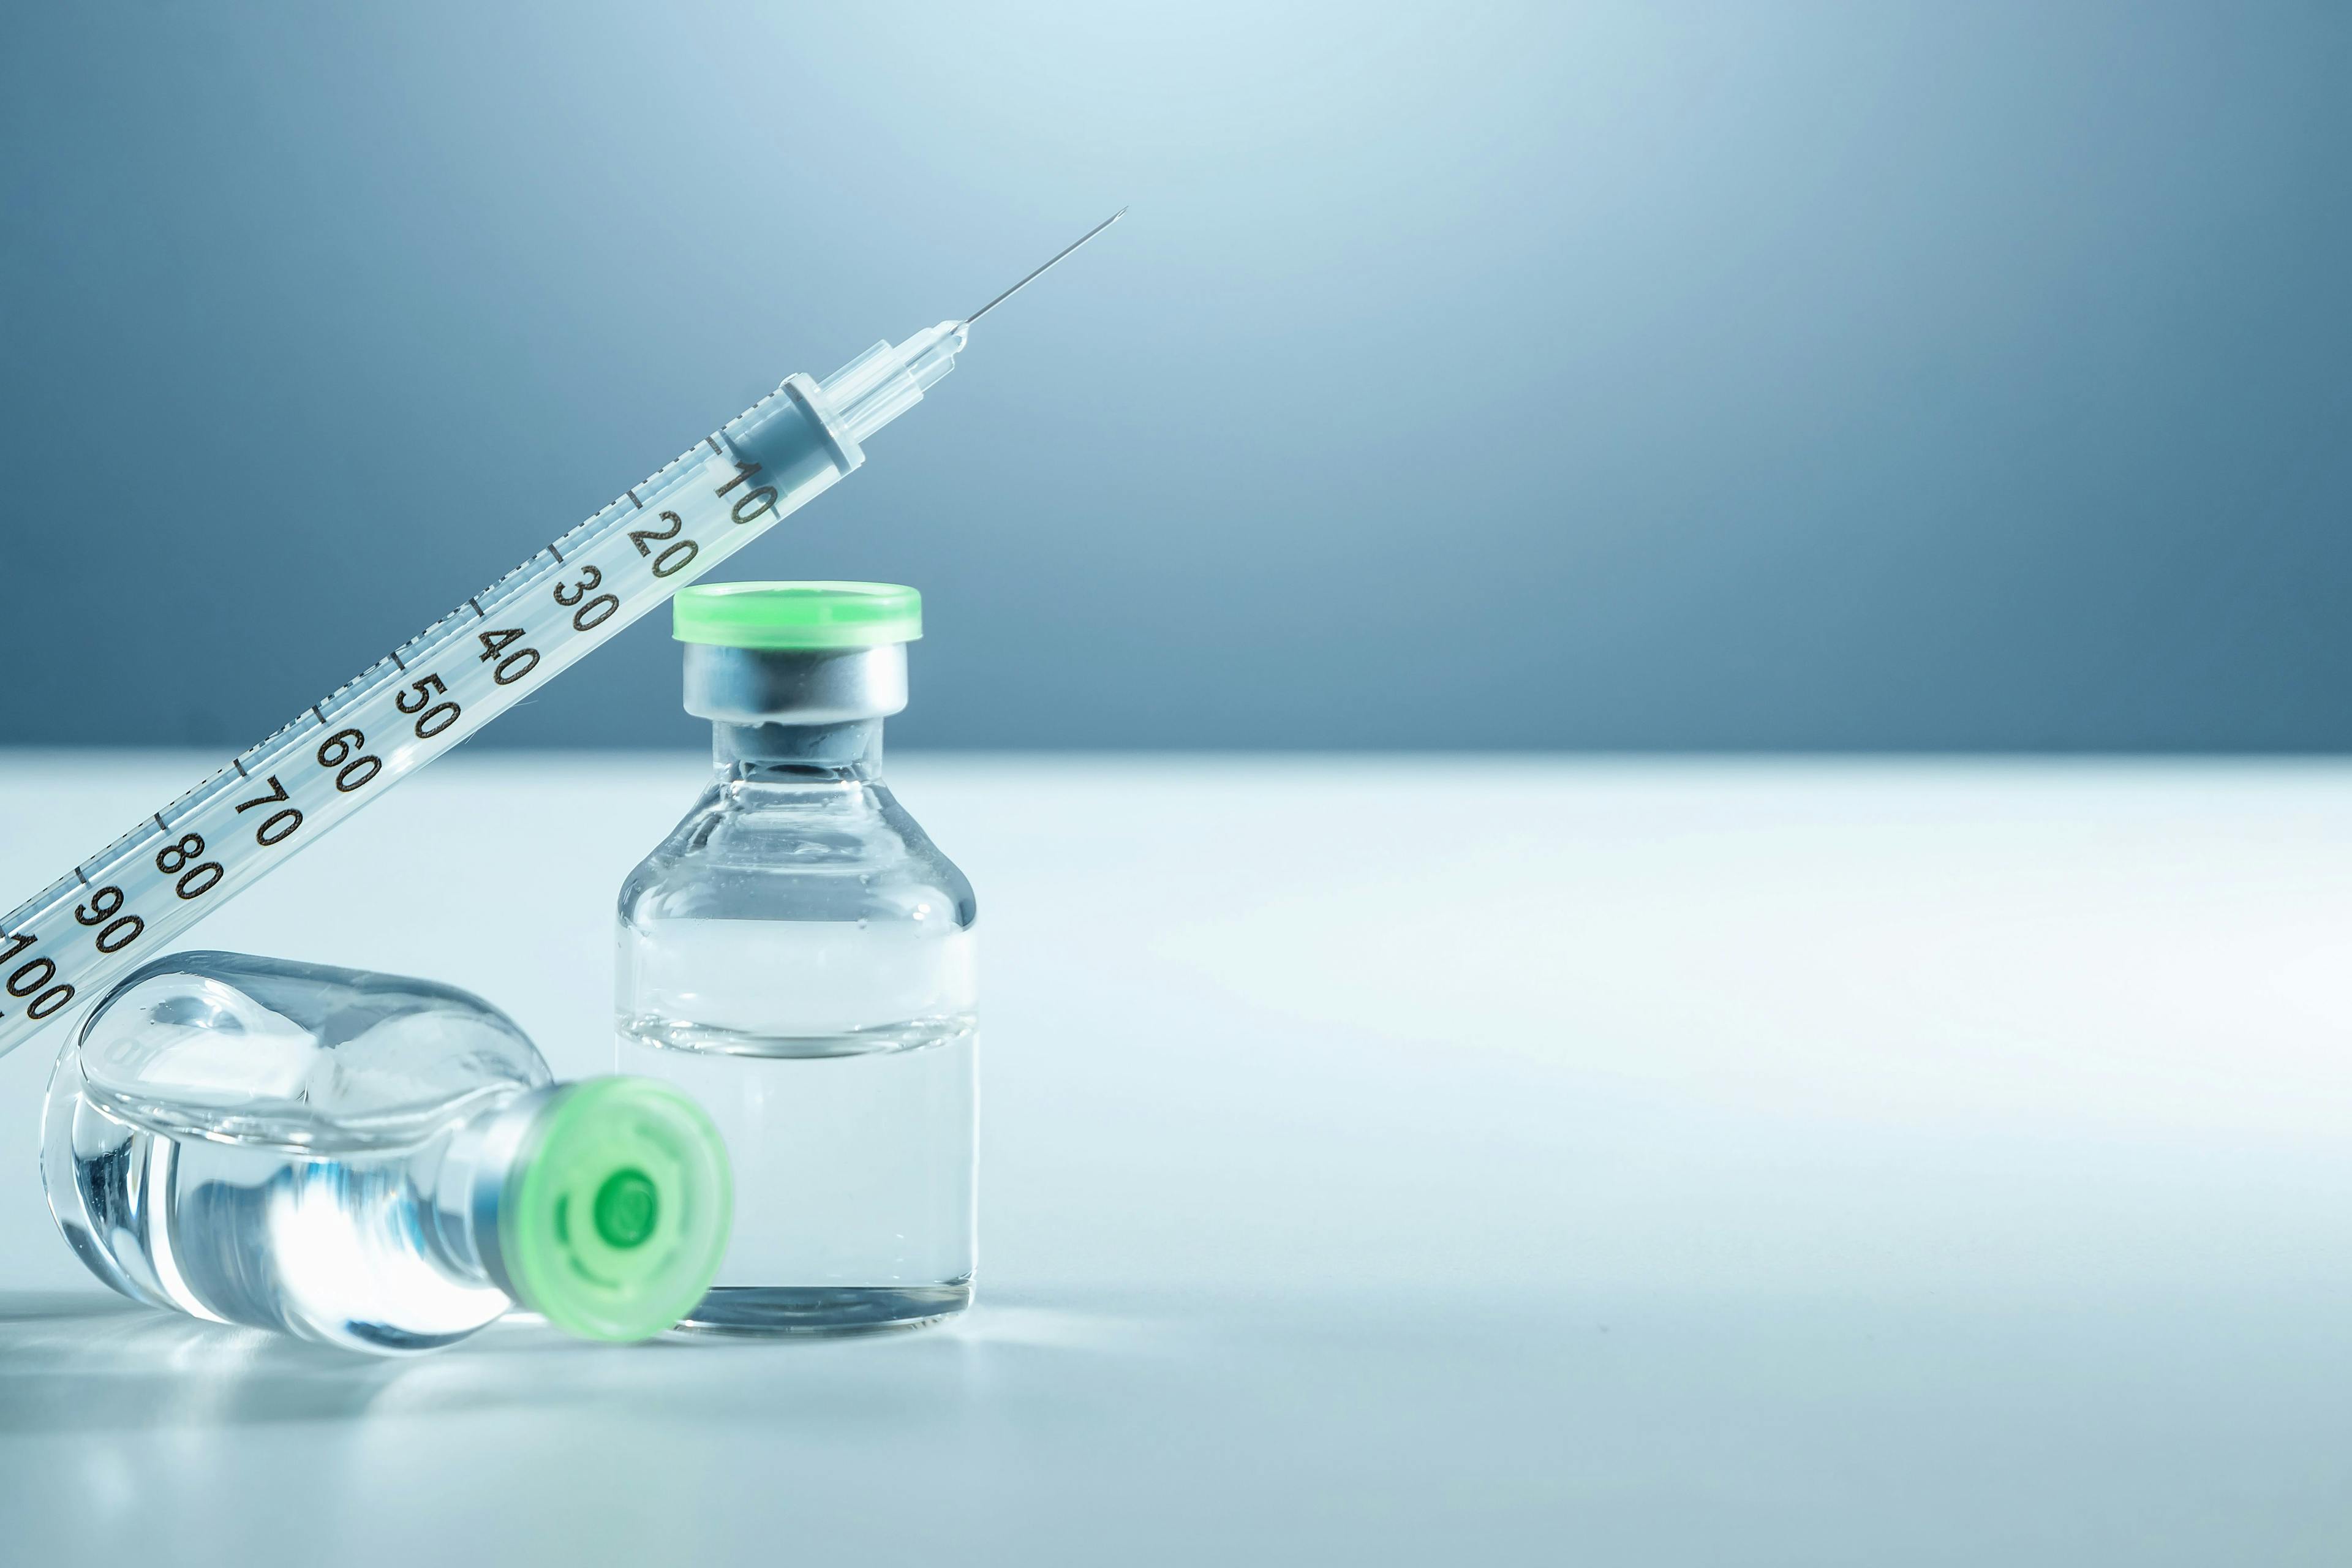 FDA Approves Tezepelumab for Self-Administration With New Pre-Filled Pen 